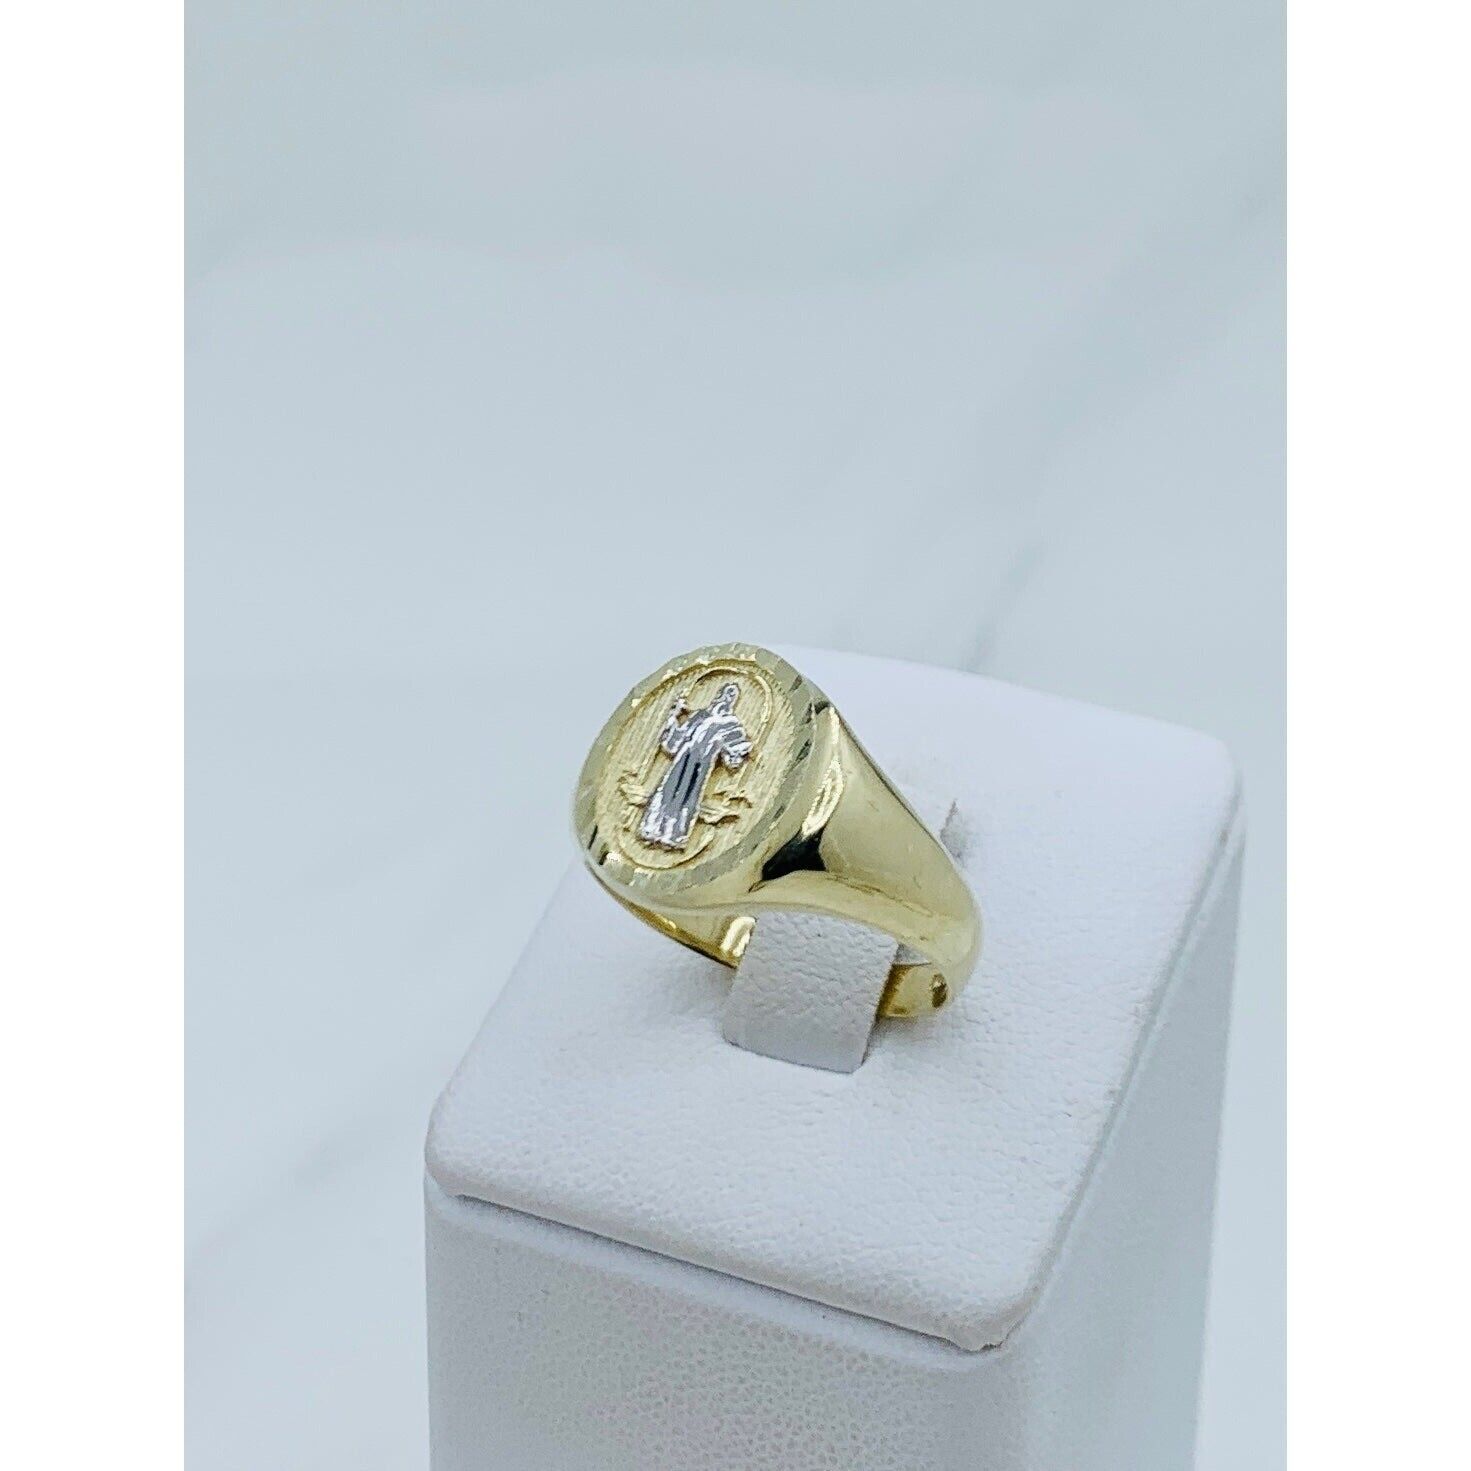 Pre-owned Stampd ❤️ 10k Solid Gold Ring Men's St Benedict San Benito Size 10.5 ❤️ Anillo En Oro